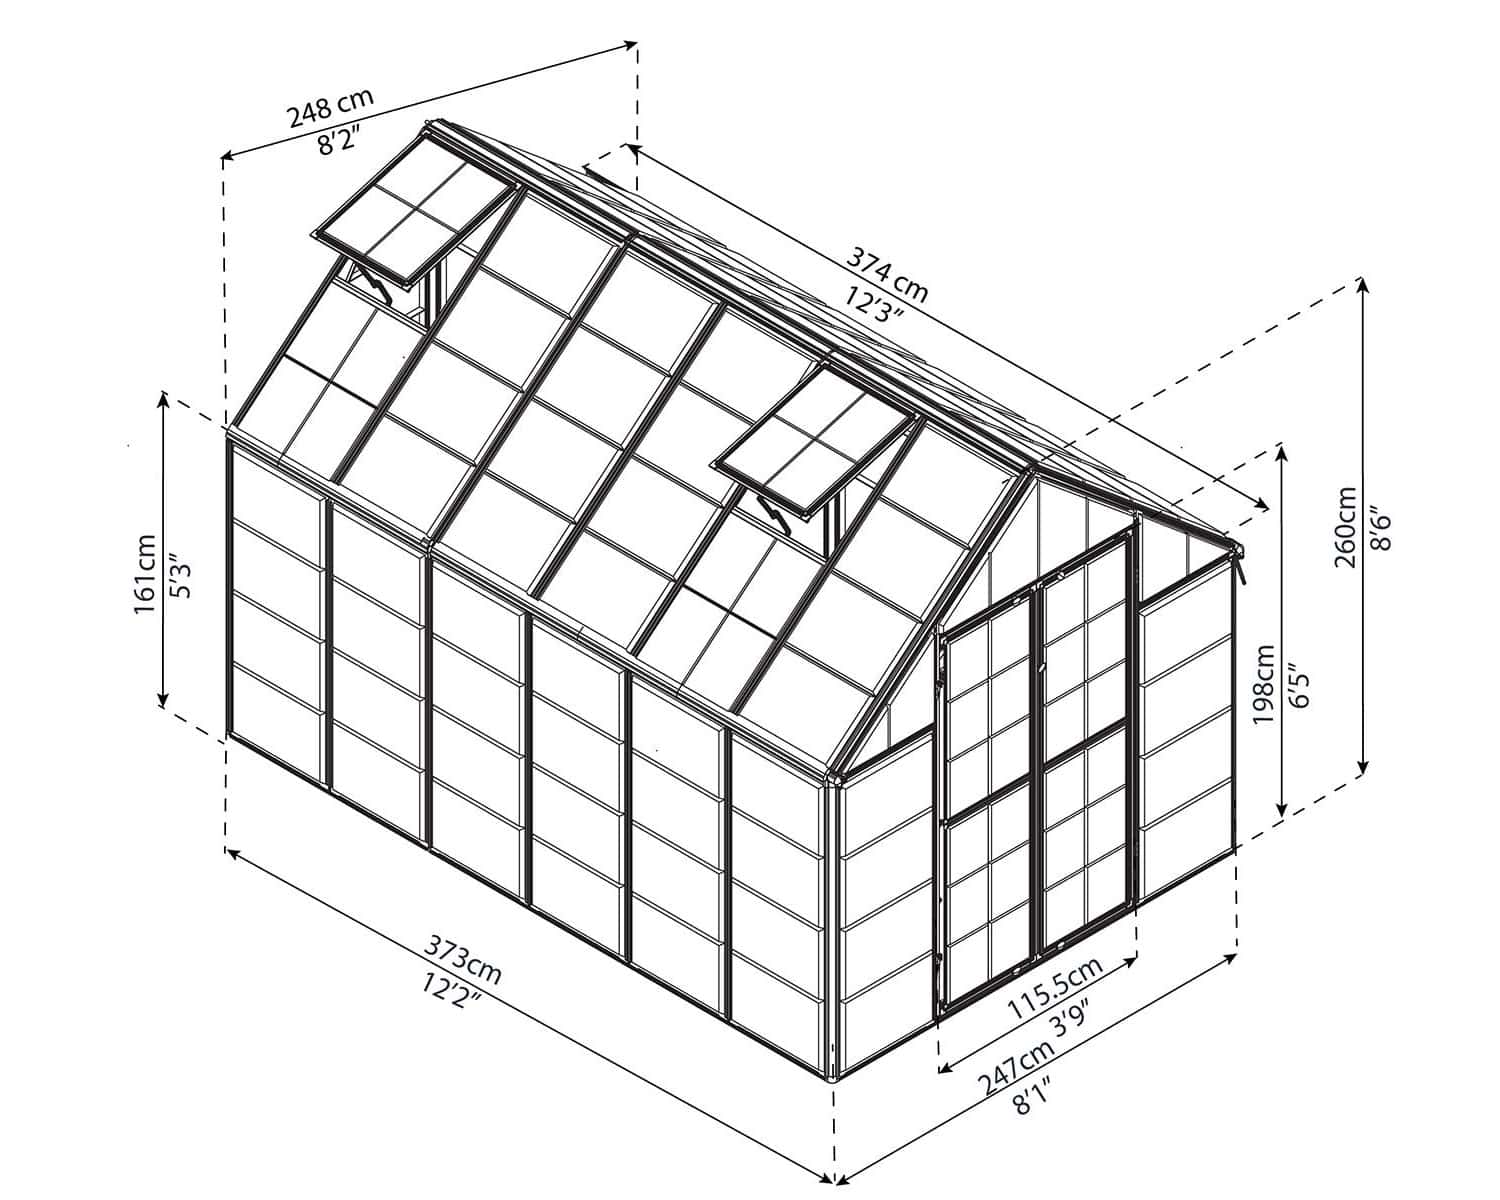 Snap&Grow™ 8x8x12.ft Clear Wall Greenhouse - Dive To Garden